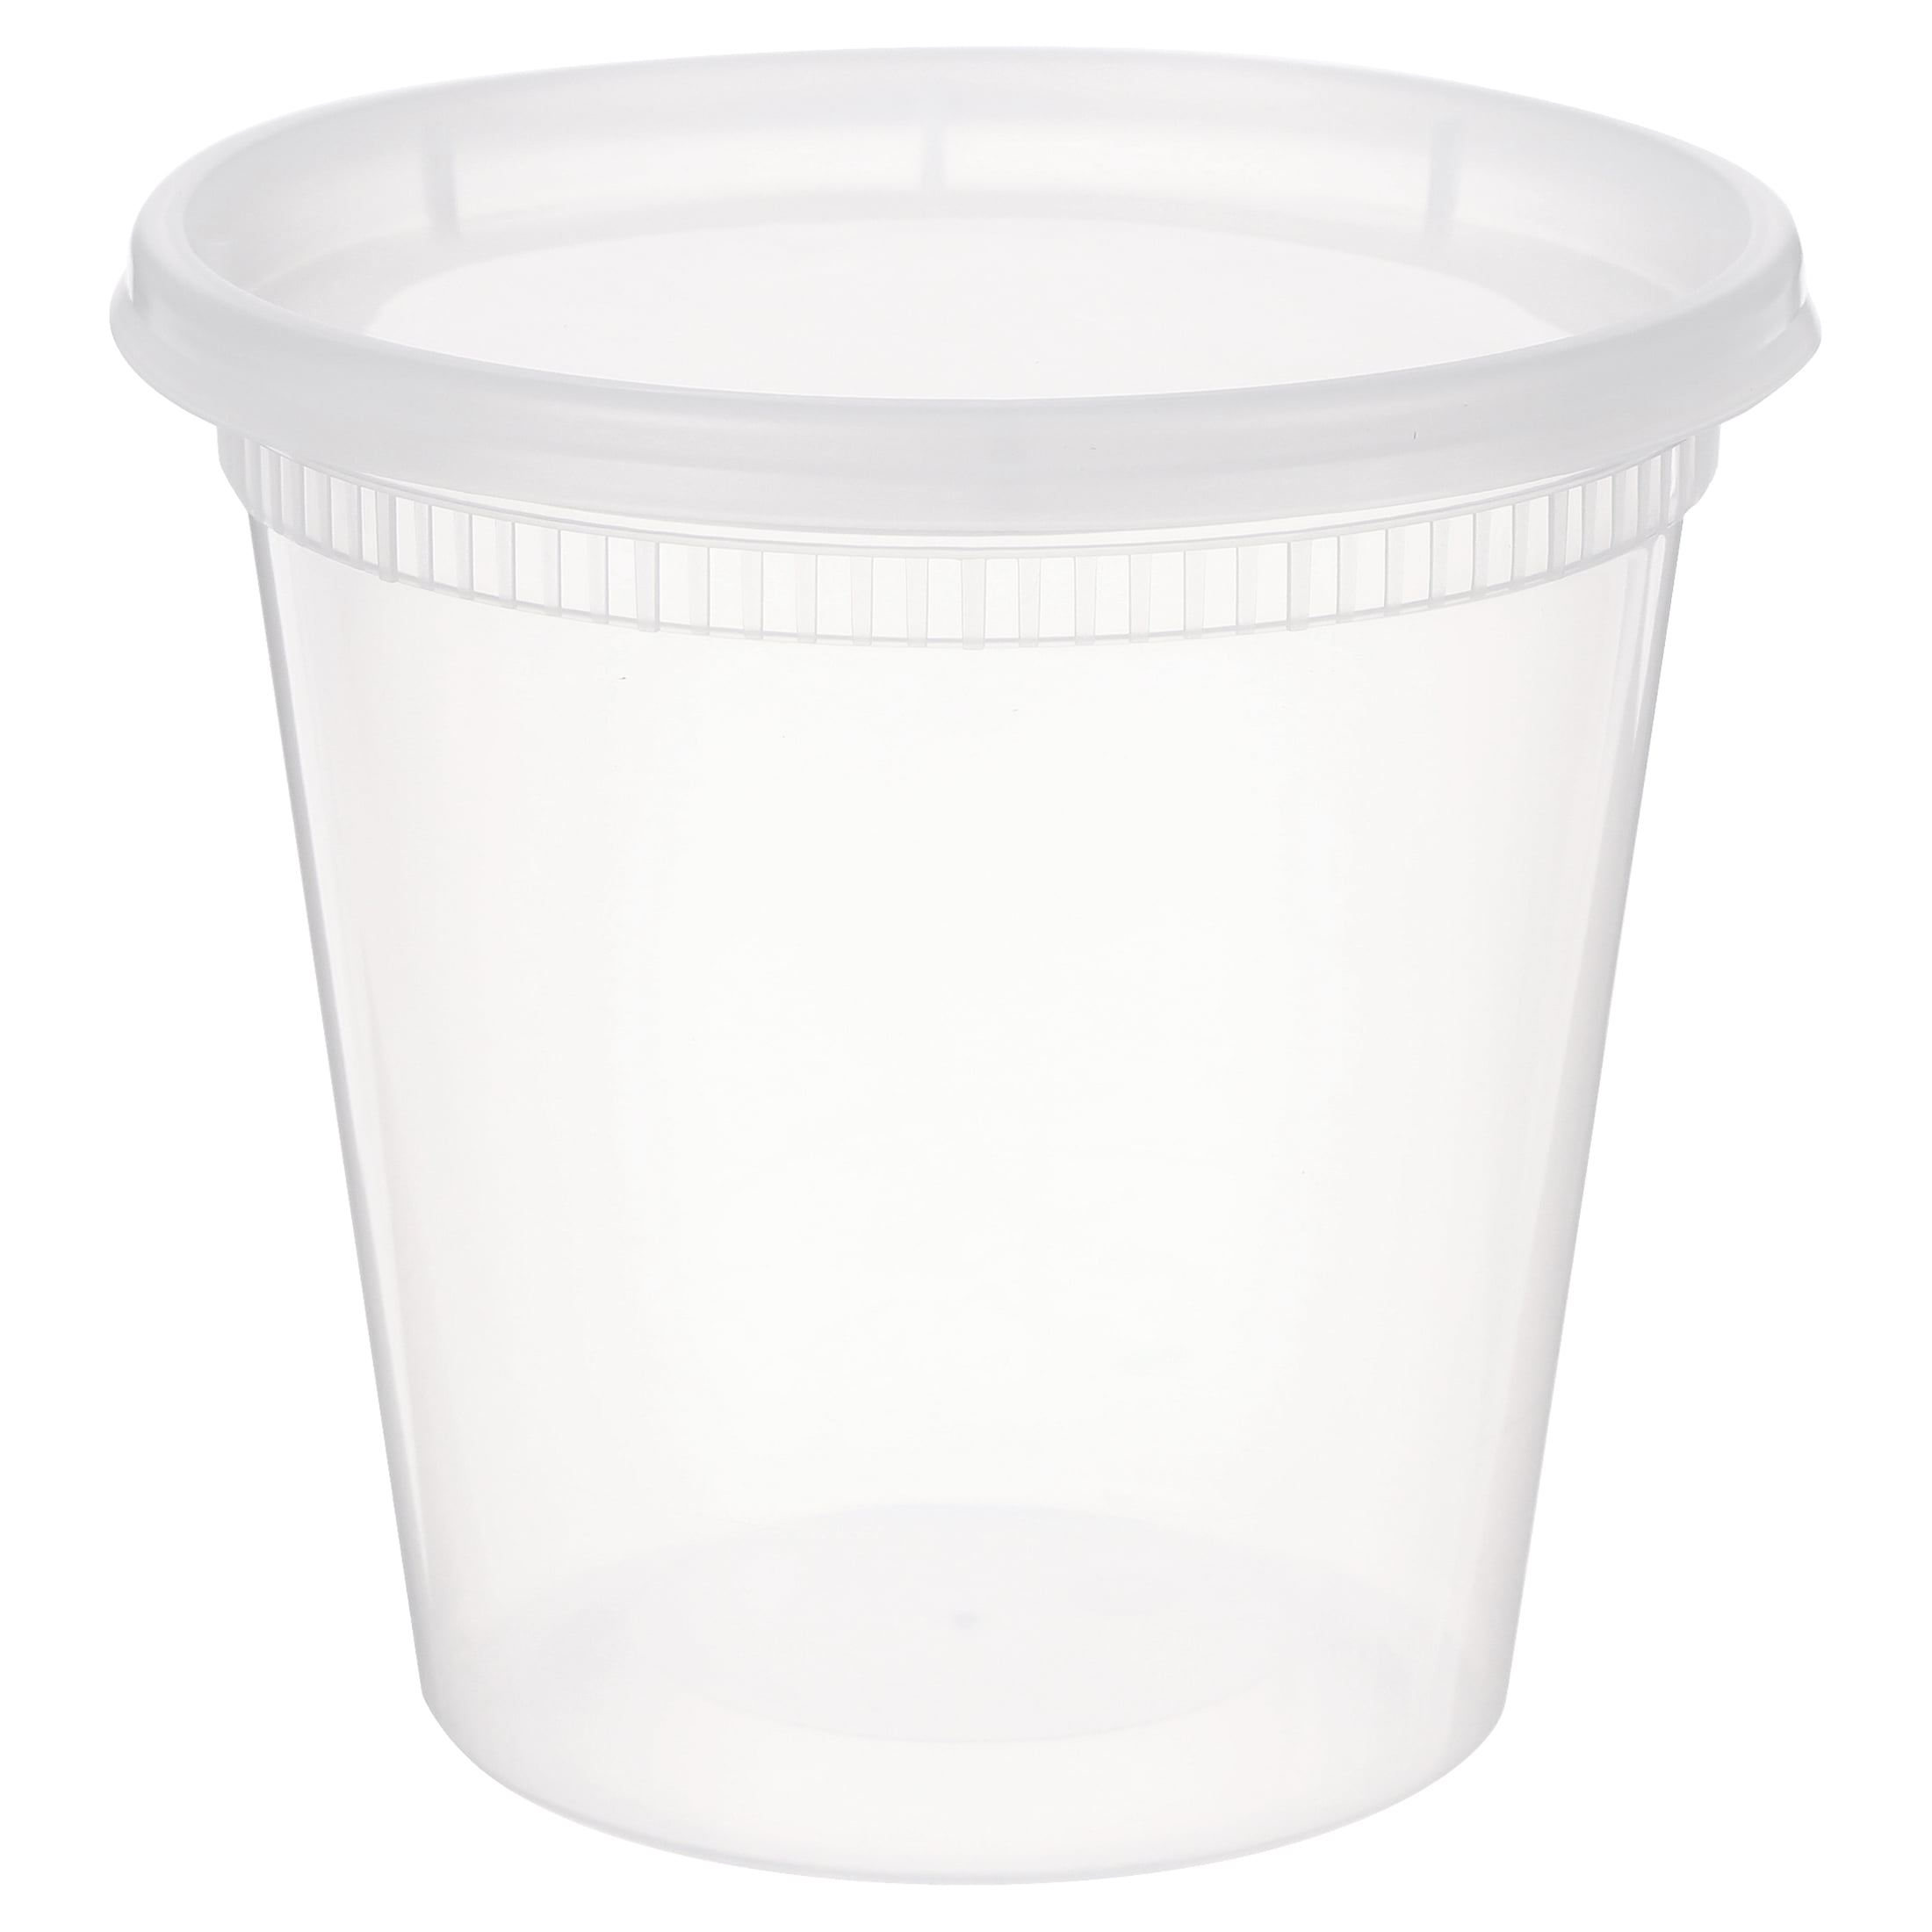  Reditainer Extreme Freeze Deli Food Containers with Lids,  32-Ounce, 24-Pack : Everything Else